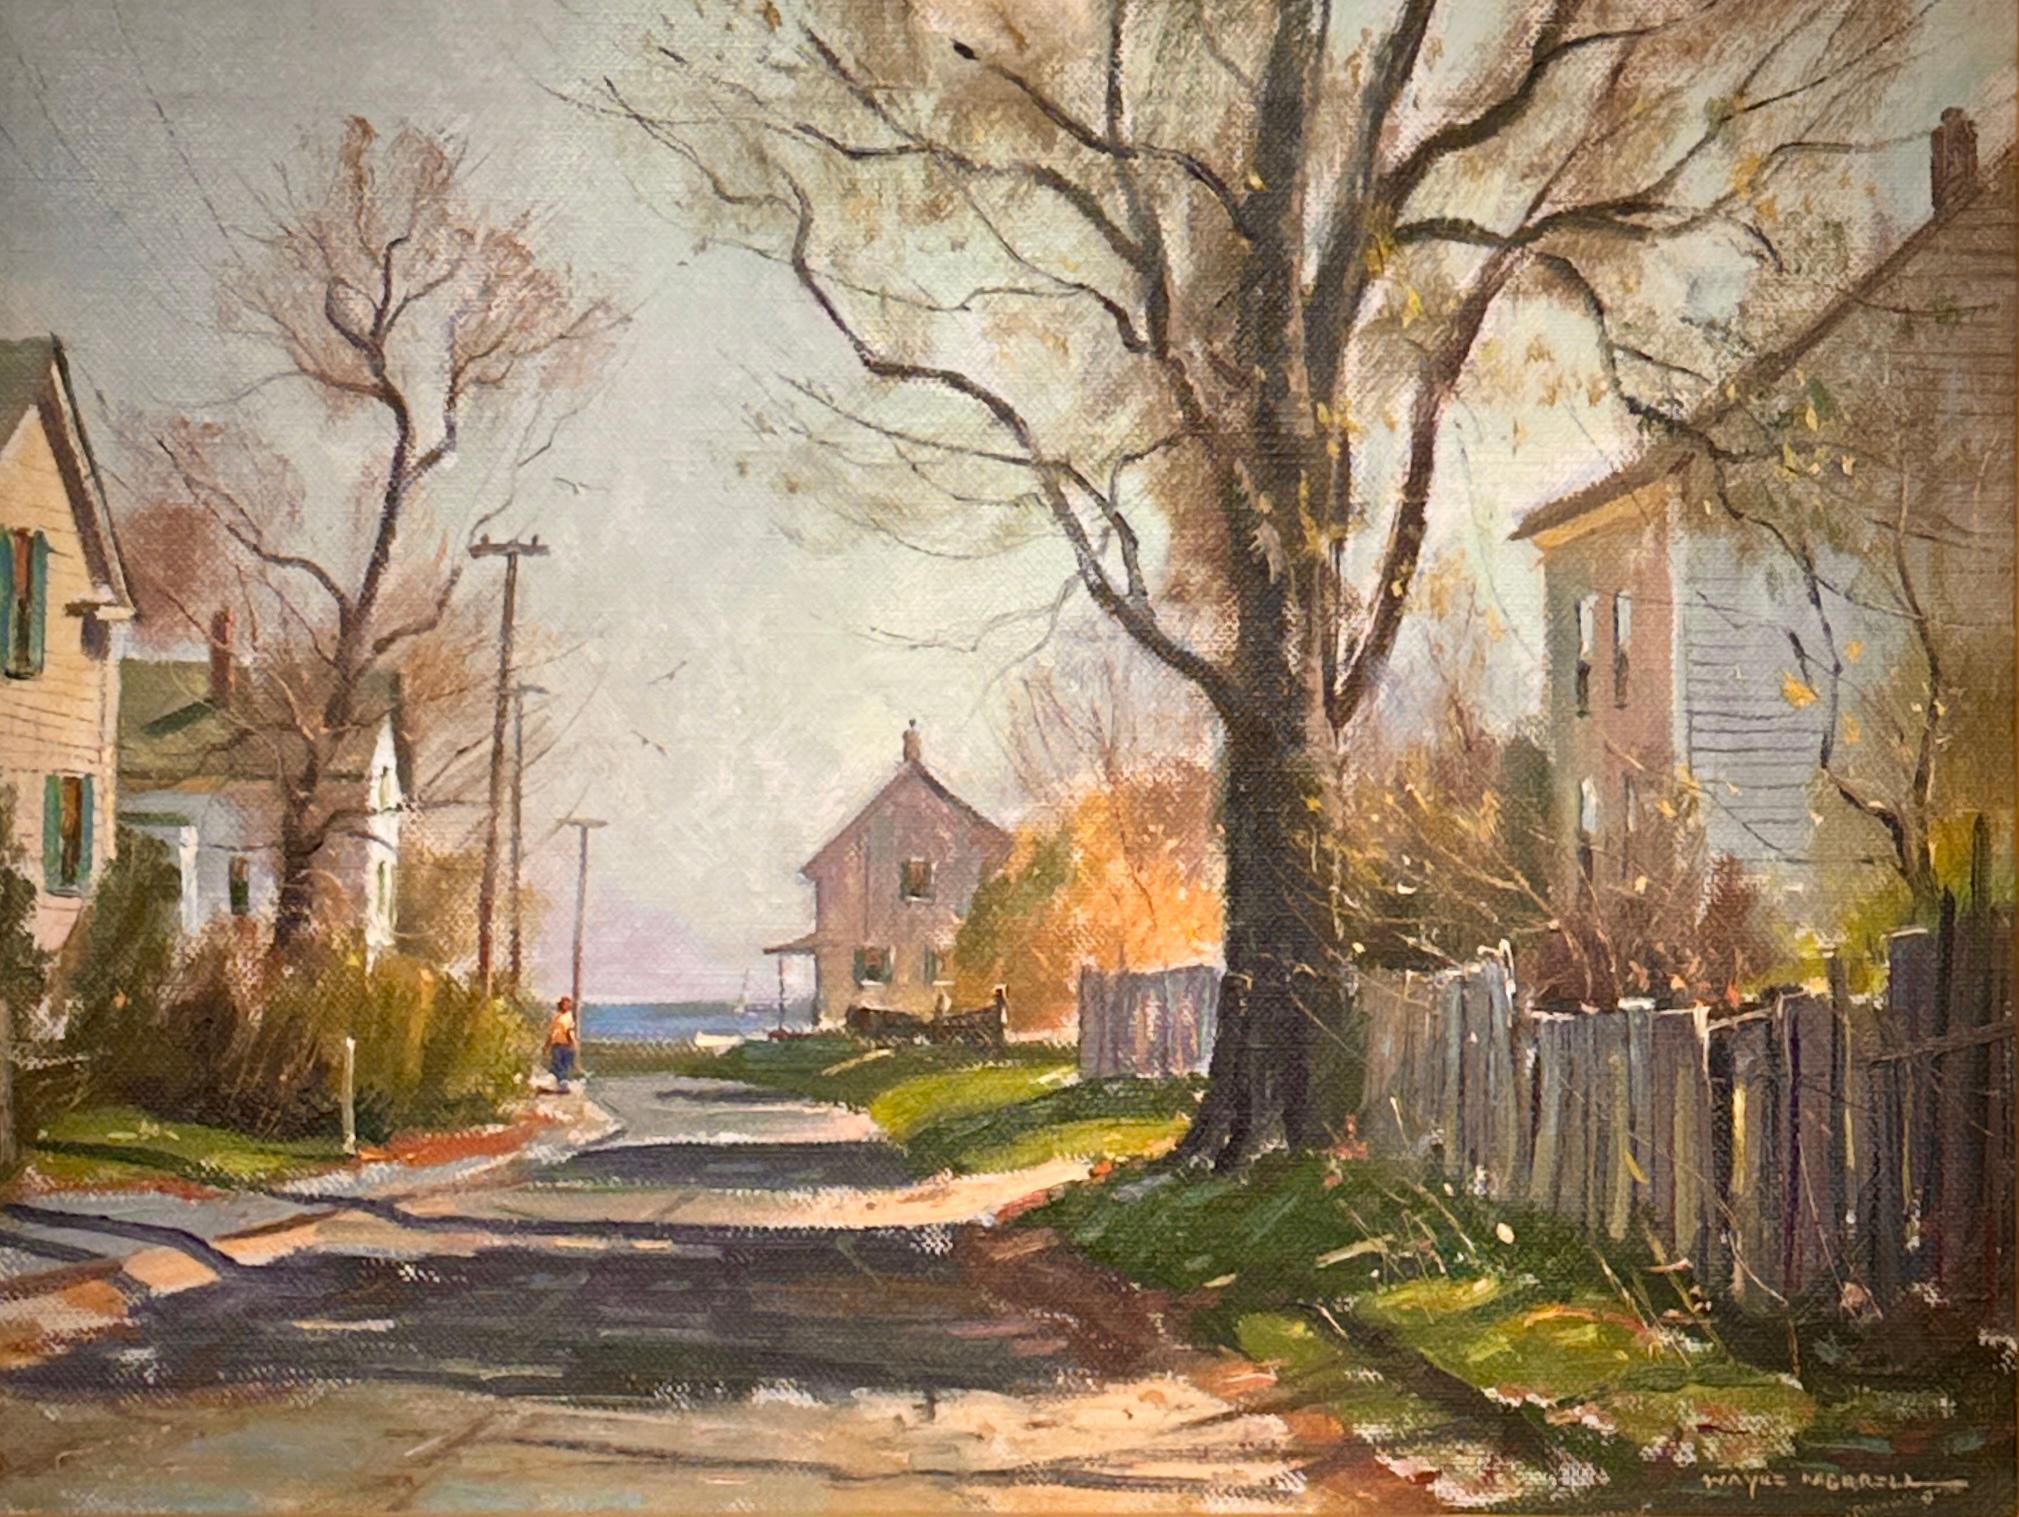 Wayne Morrell Landscape Painting - "Rockport Street Scene" painted in 1964 by famous Rockport Massachusetts Artist